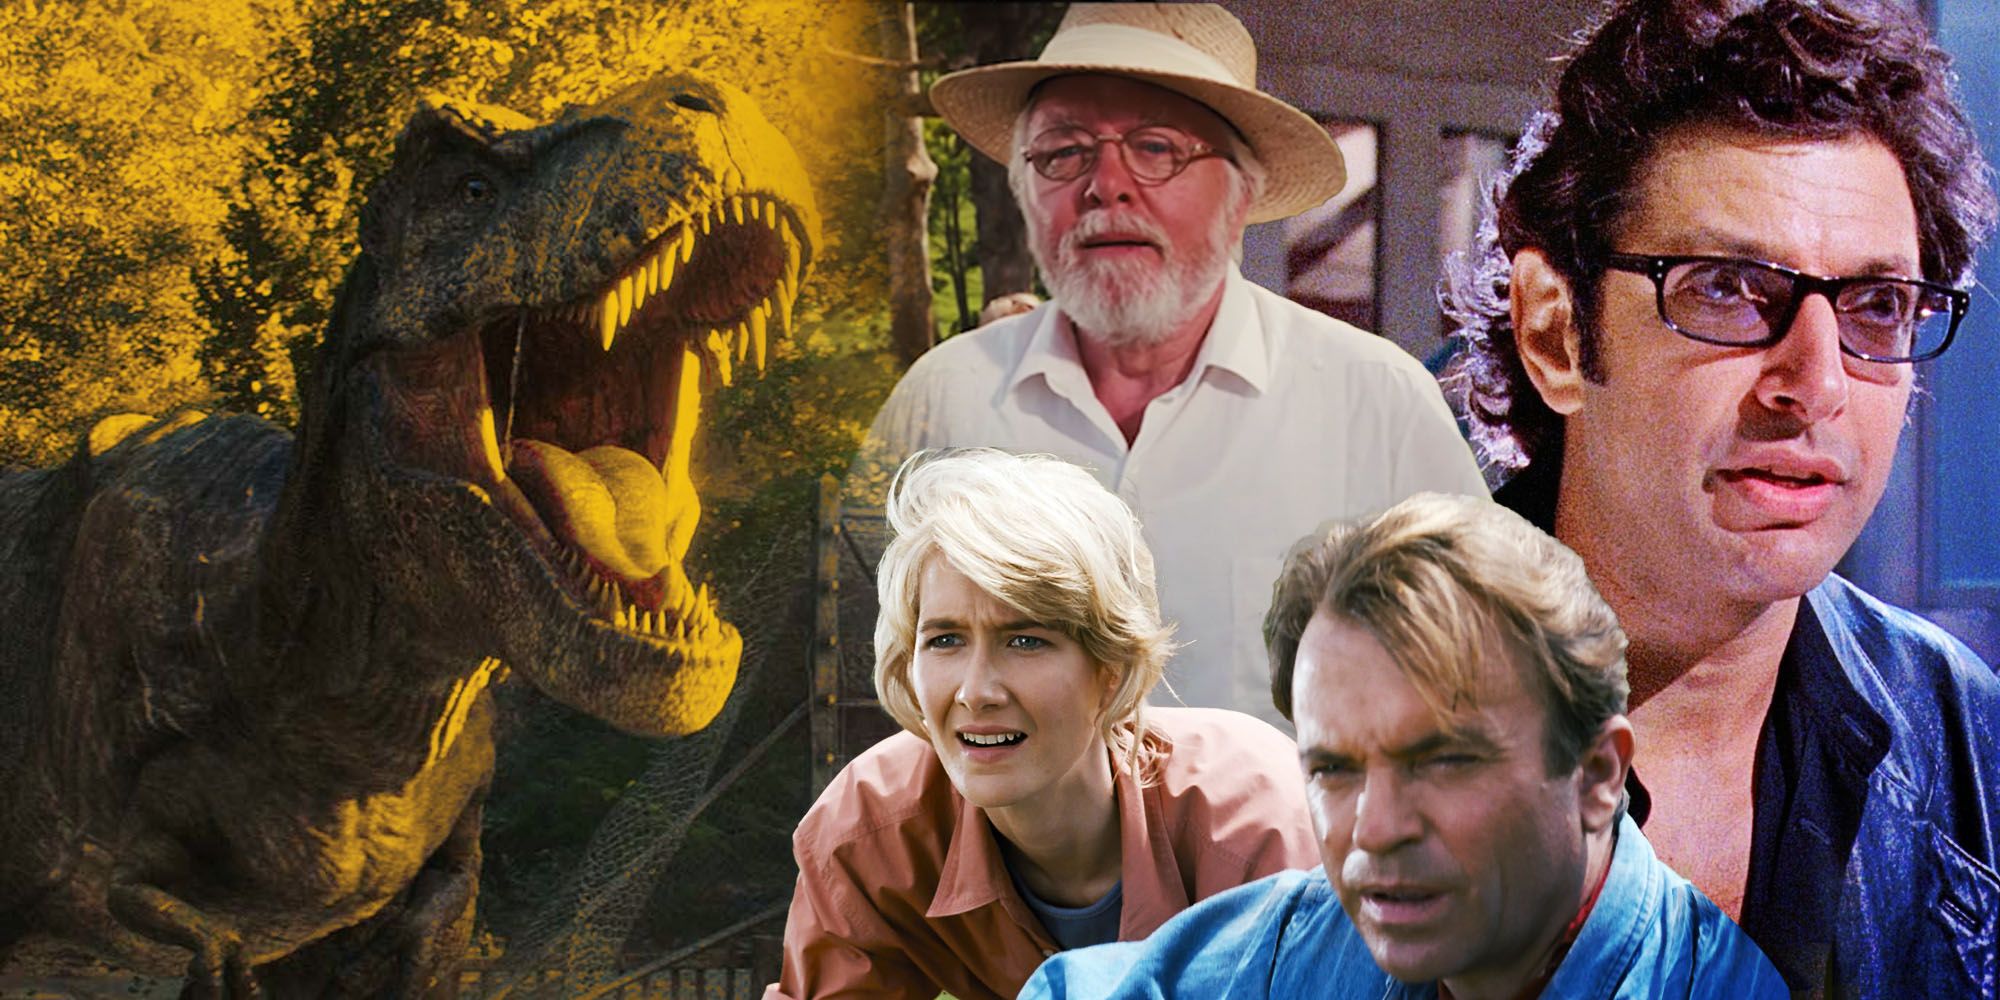 T Rex from Jurassic Park next to a collage of Jurassic Park's characters